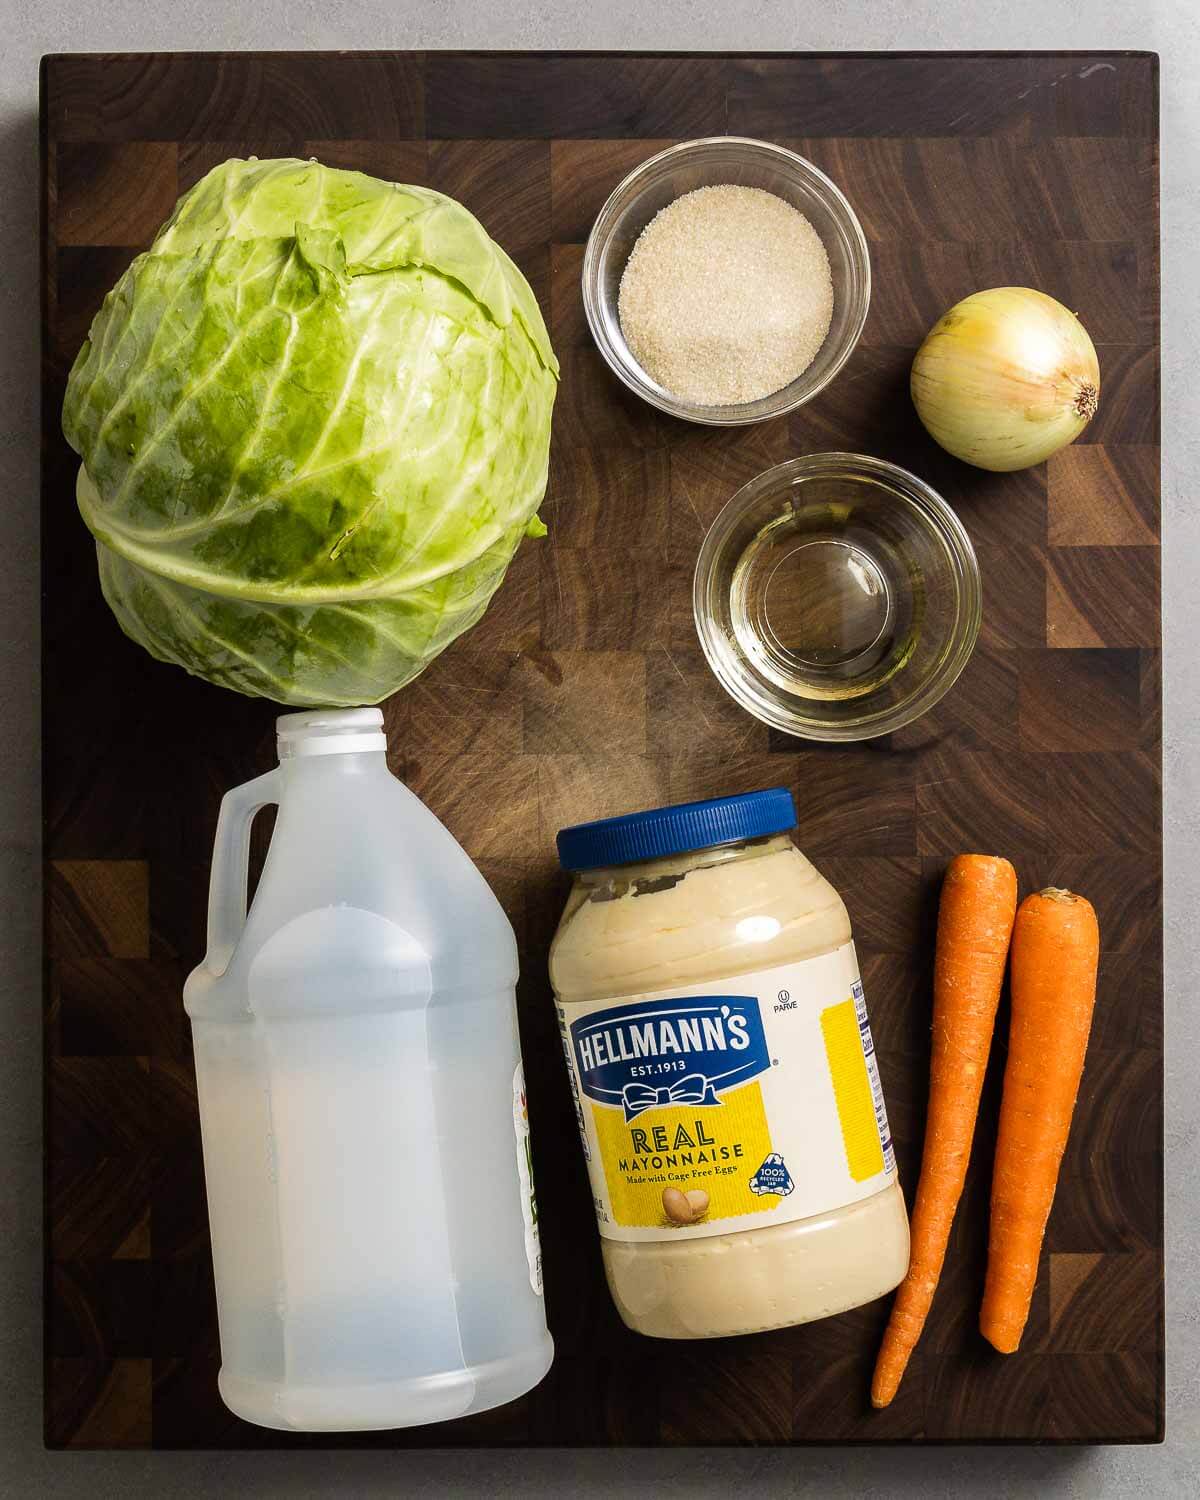 Ingredients shown: cabbage, sugar, vegetable oil, onion, vinegar, mayonnaise, and carrots.